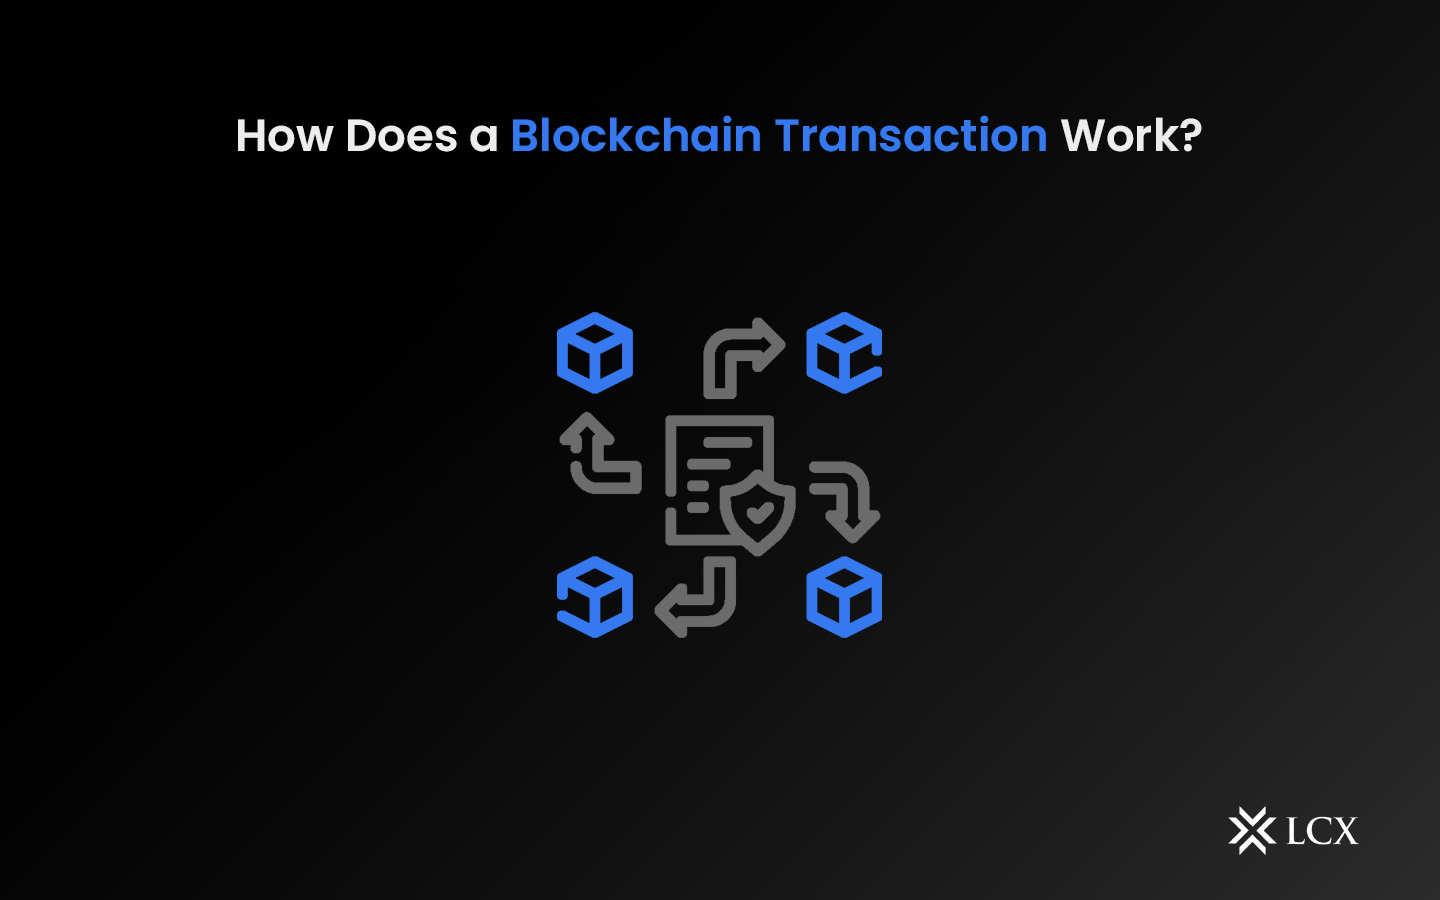 How Does a Blockchain Transaction Work?